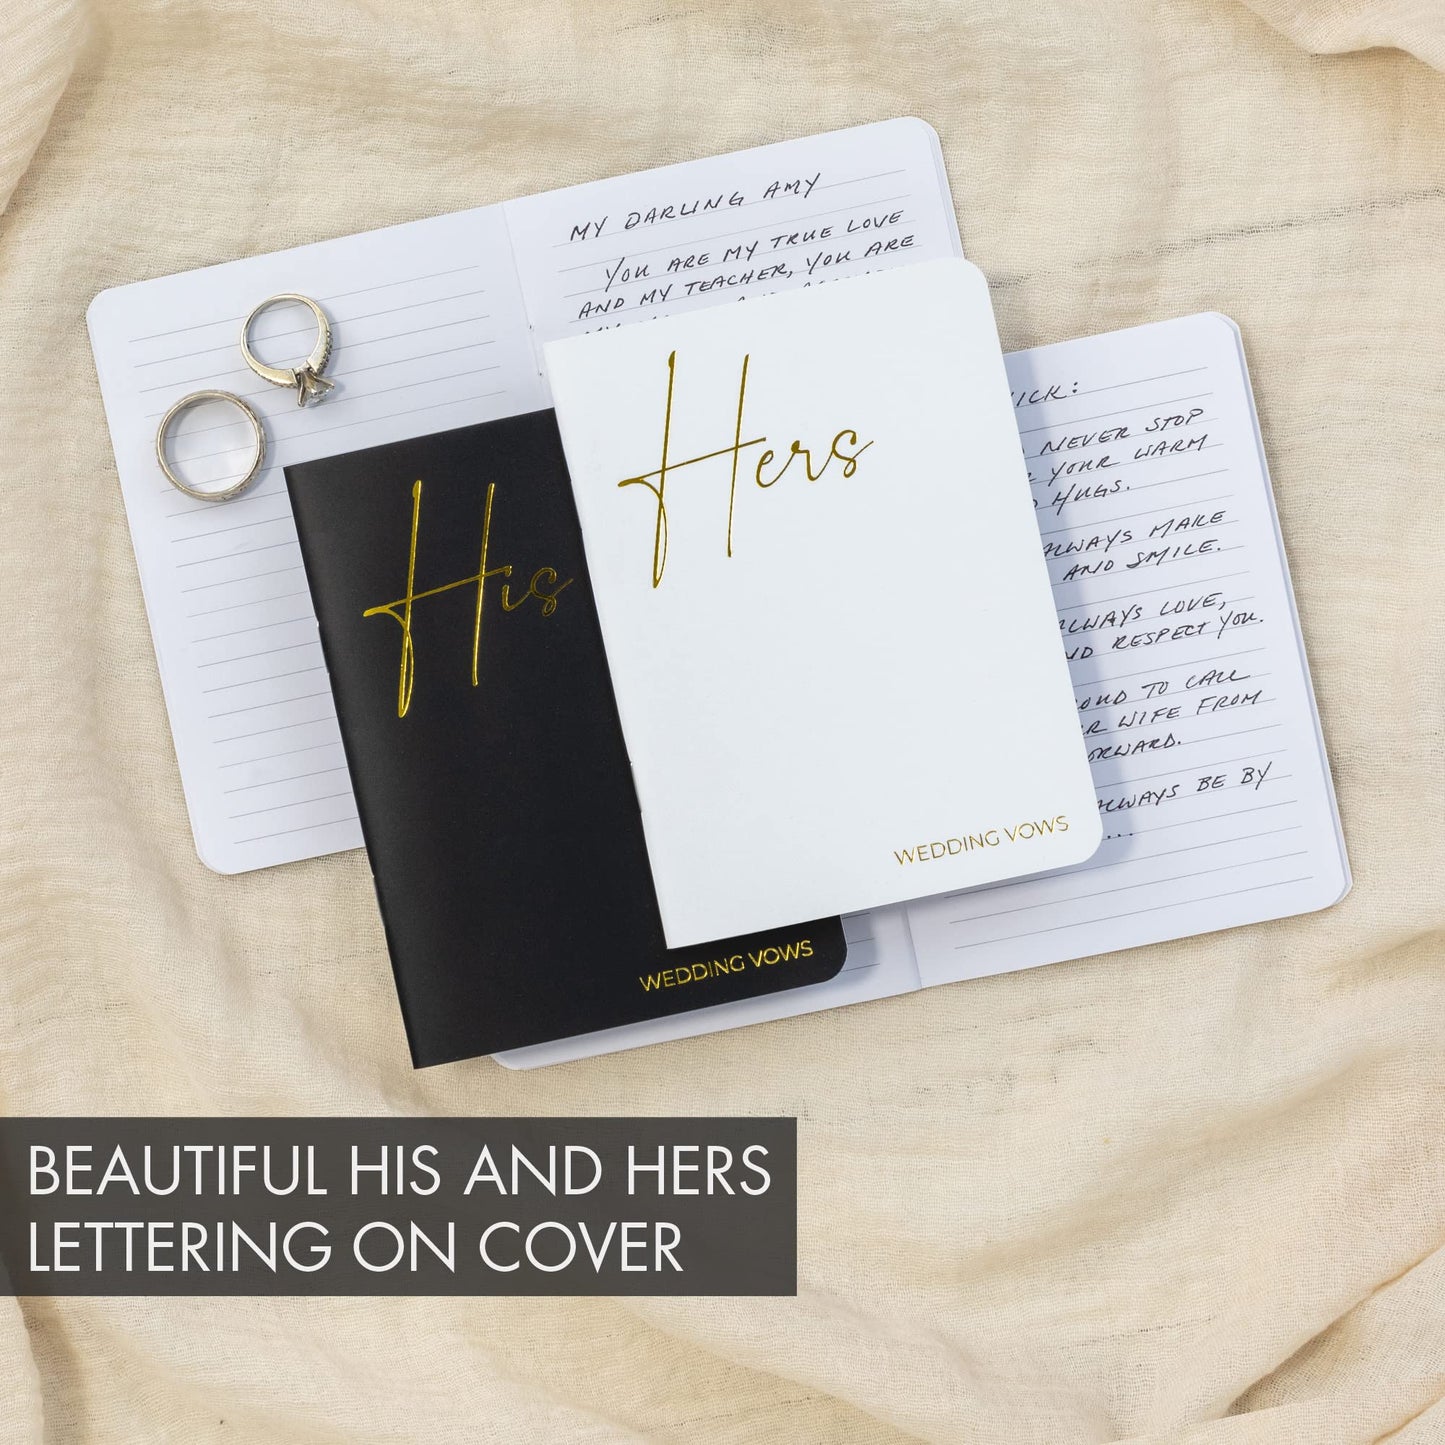 Elegant Vow Books With Gold Foil Lettering For Your Wedding - Perfectly Sized His and Hers Vow Books With Plenty Of Pages To Write Whatever is on Your Heart - A Beautiful Addition For The Wedding Day